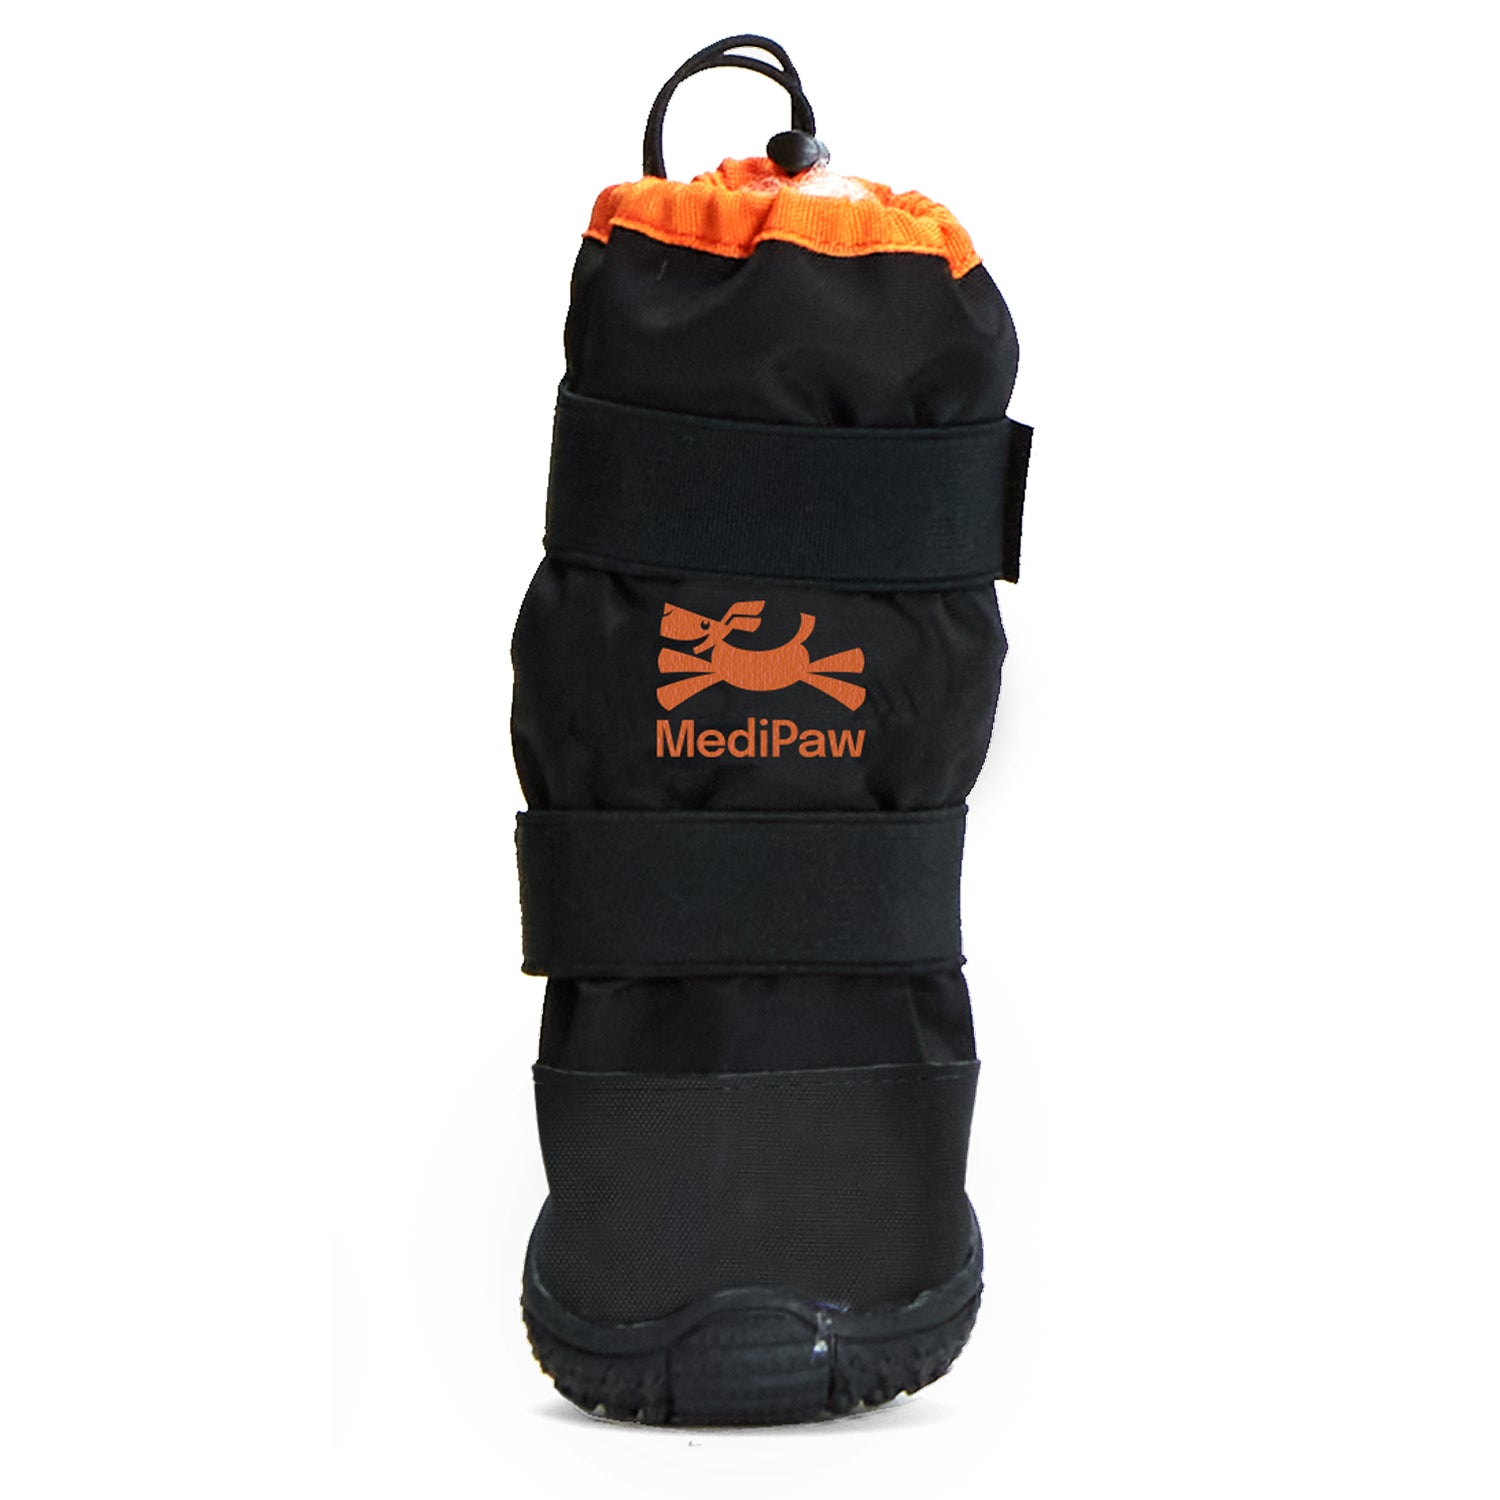 A black and orange MediPaw: Rugged X-Boot dog boot from Australia with an orange strap, made by Your Whole Dog.